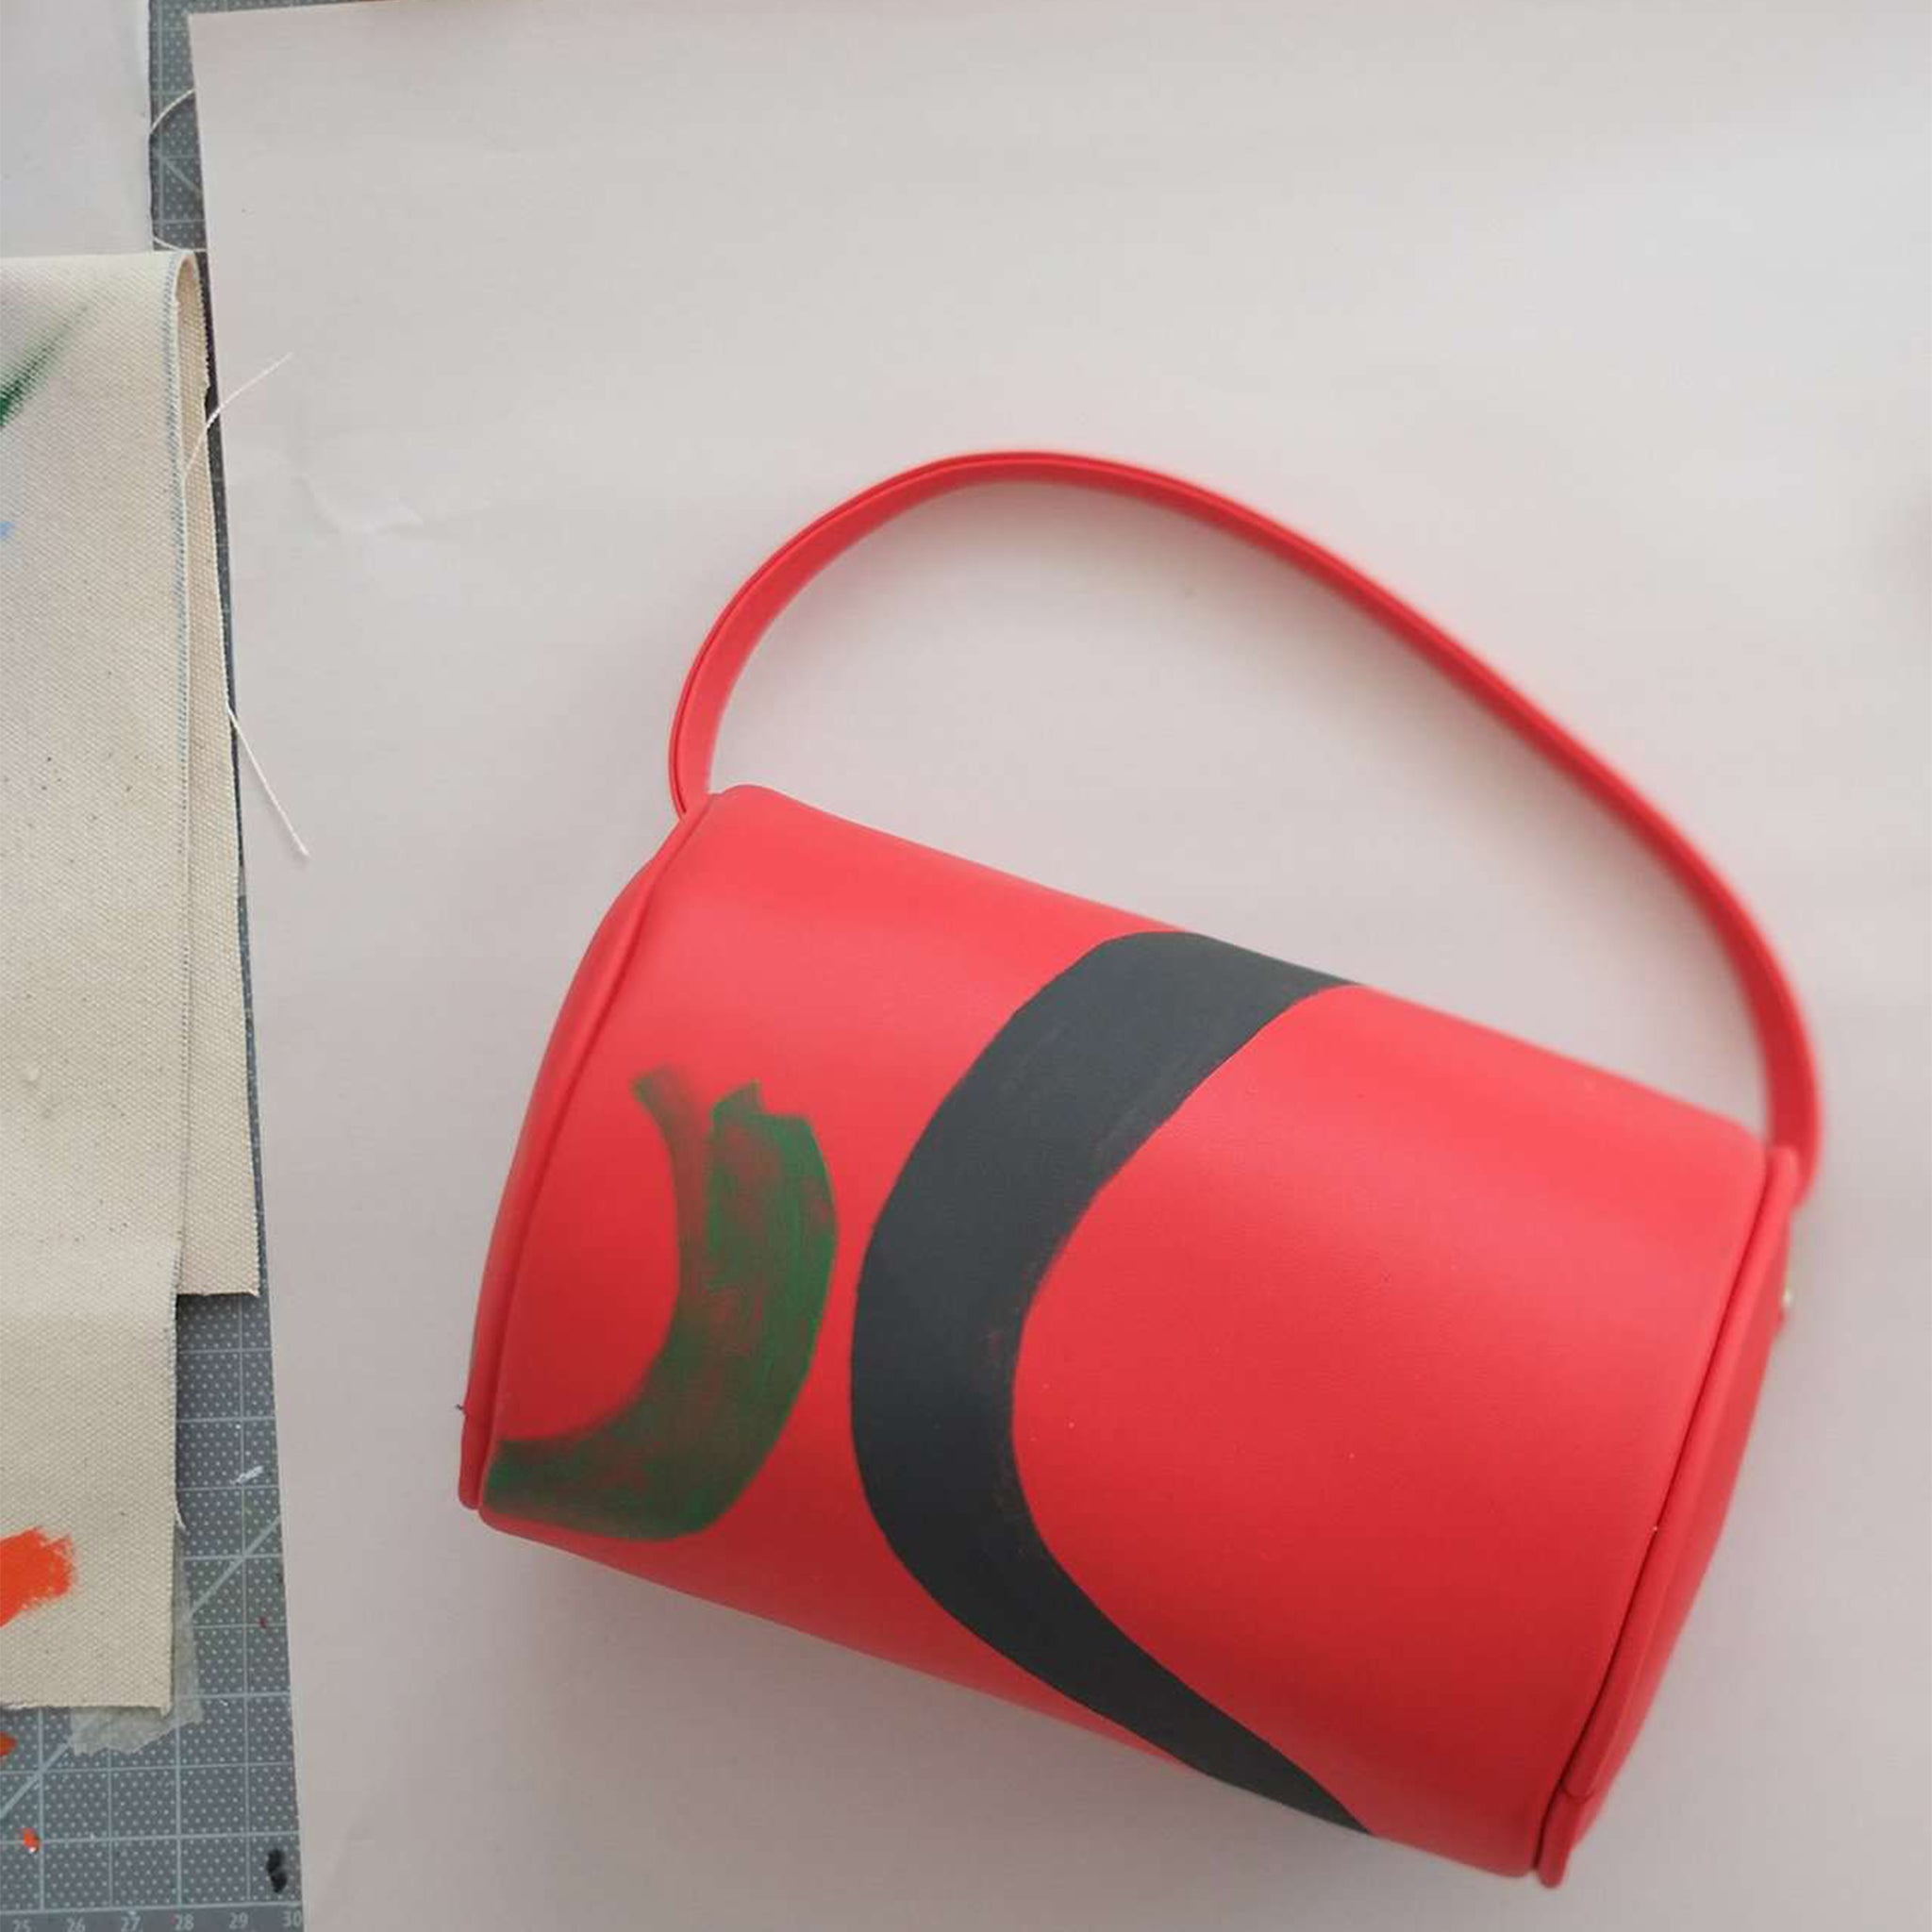 Vegan leather duffle style mini bag with detachable crossbody strap in red with hand painted squiggles in black and green.  Overhead shot.